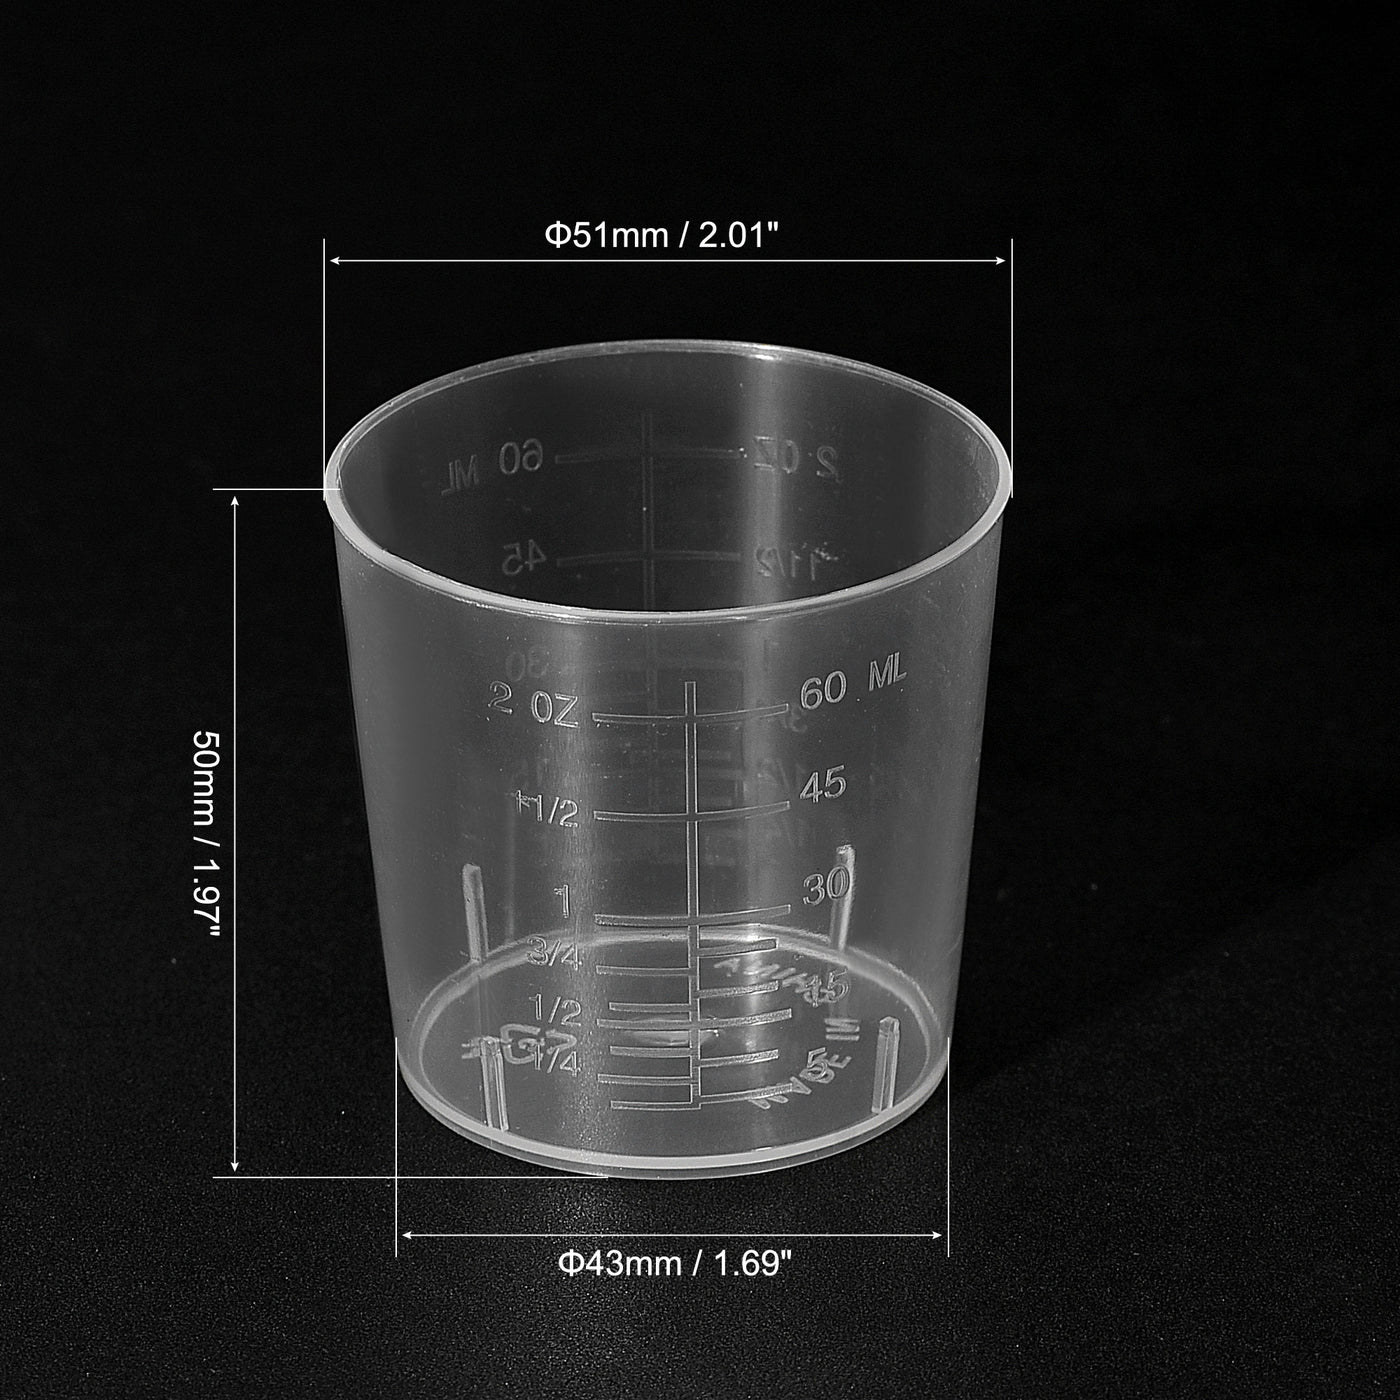 uxcell Uxcell 22 Pack Measuring Cup 60ml/2oz PP Plastic Graduated Beaker Clear with 22 Pack Wooden Stirring Sticks for Lab Kitchen Liquids